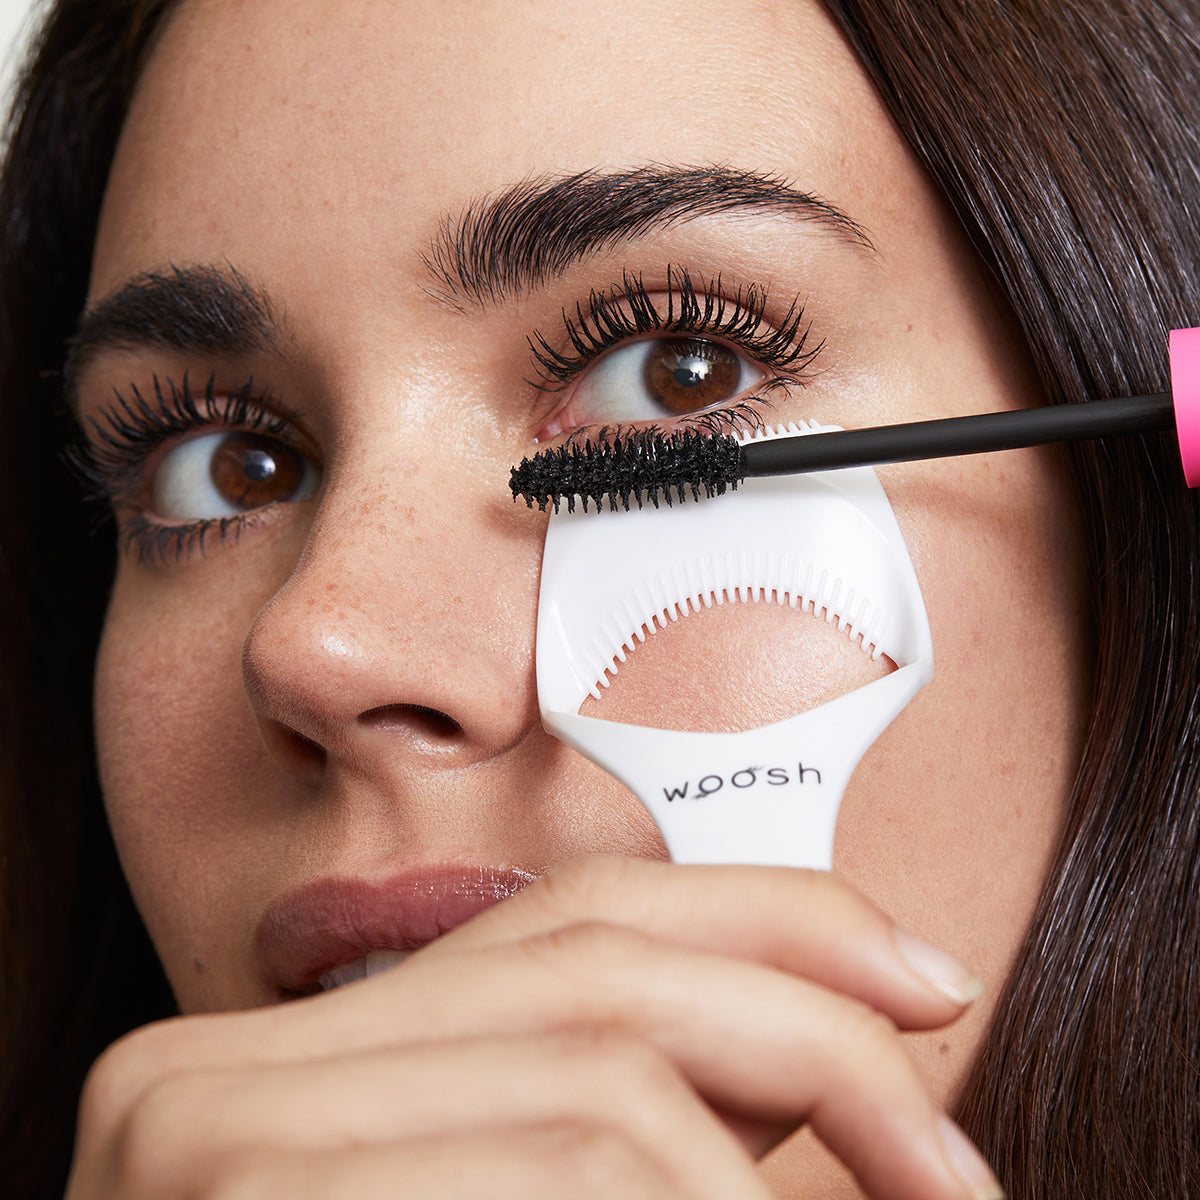 Model using the mascara shield to apply mascara to her lower lashes, protecting her skin from the mascara.